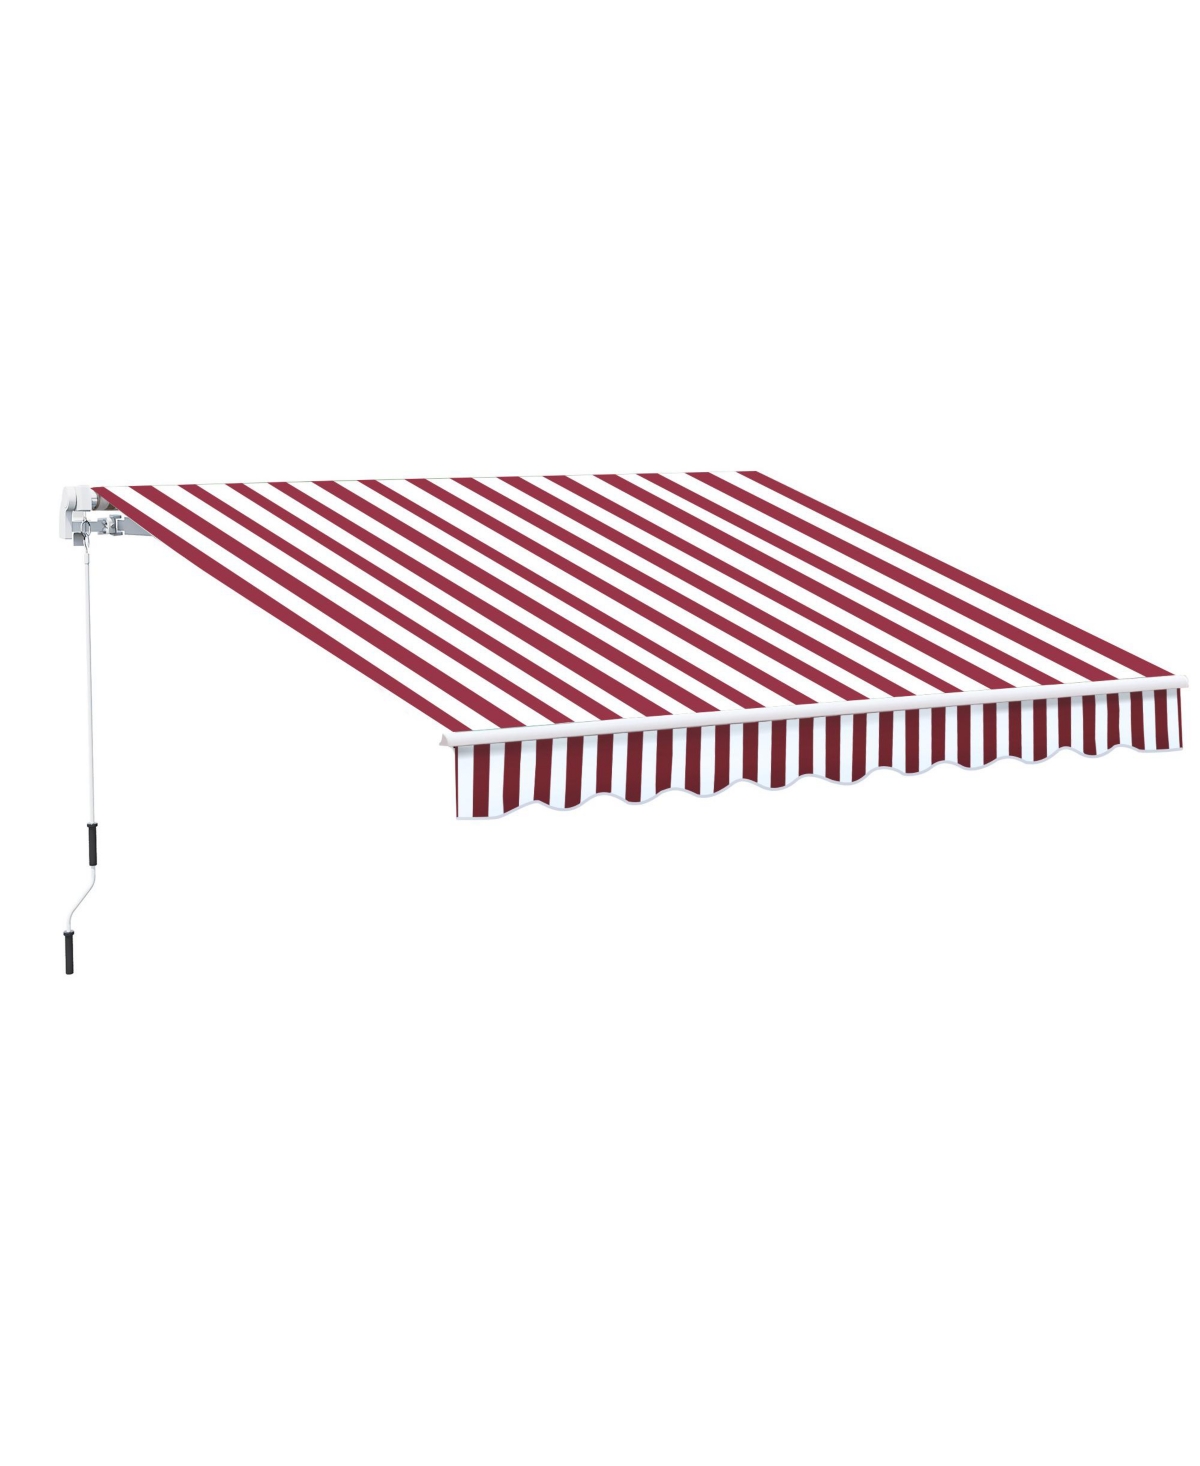 10' x 8' Manual Retractable Awning Sun Shade Shelter for Patio Deck Yard with Uv Protection and Easy Crank Opening, Red Stripe - Multi